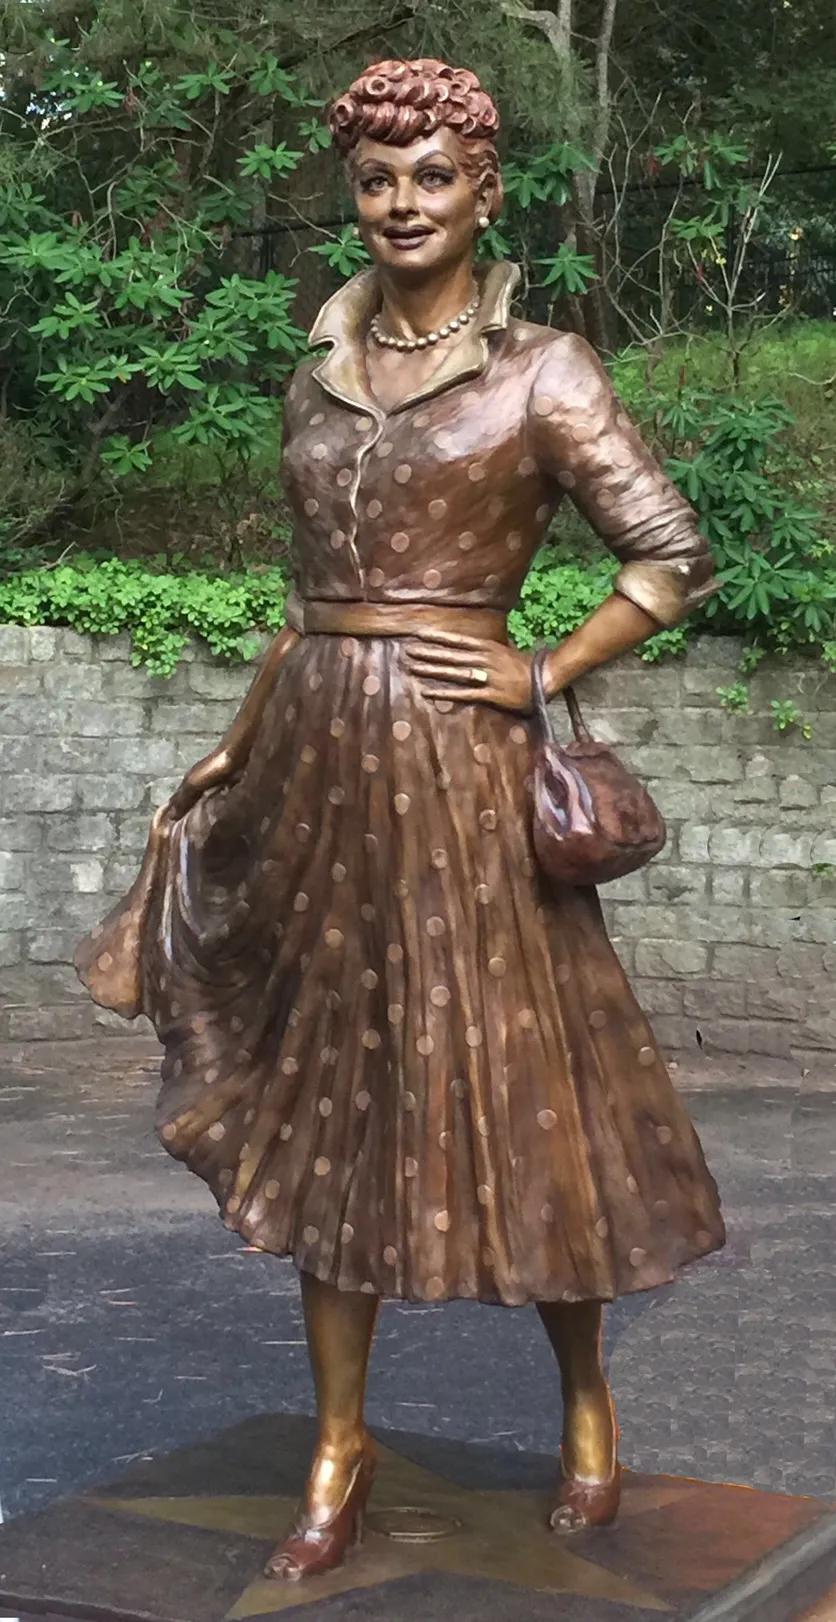 New sculptor will fix village's 'Scary Lucy' statue of Lucille Ball, mayor  says